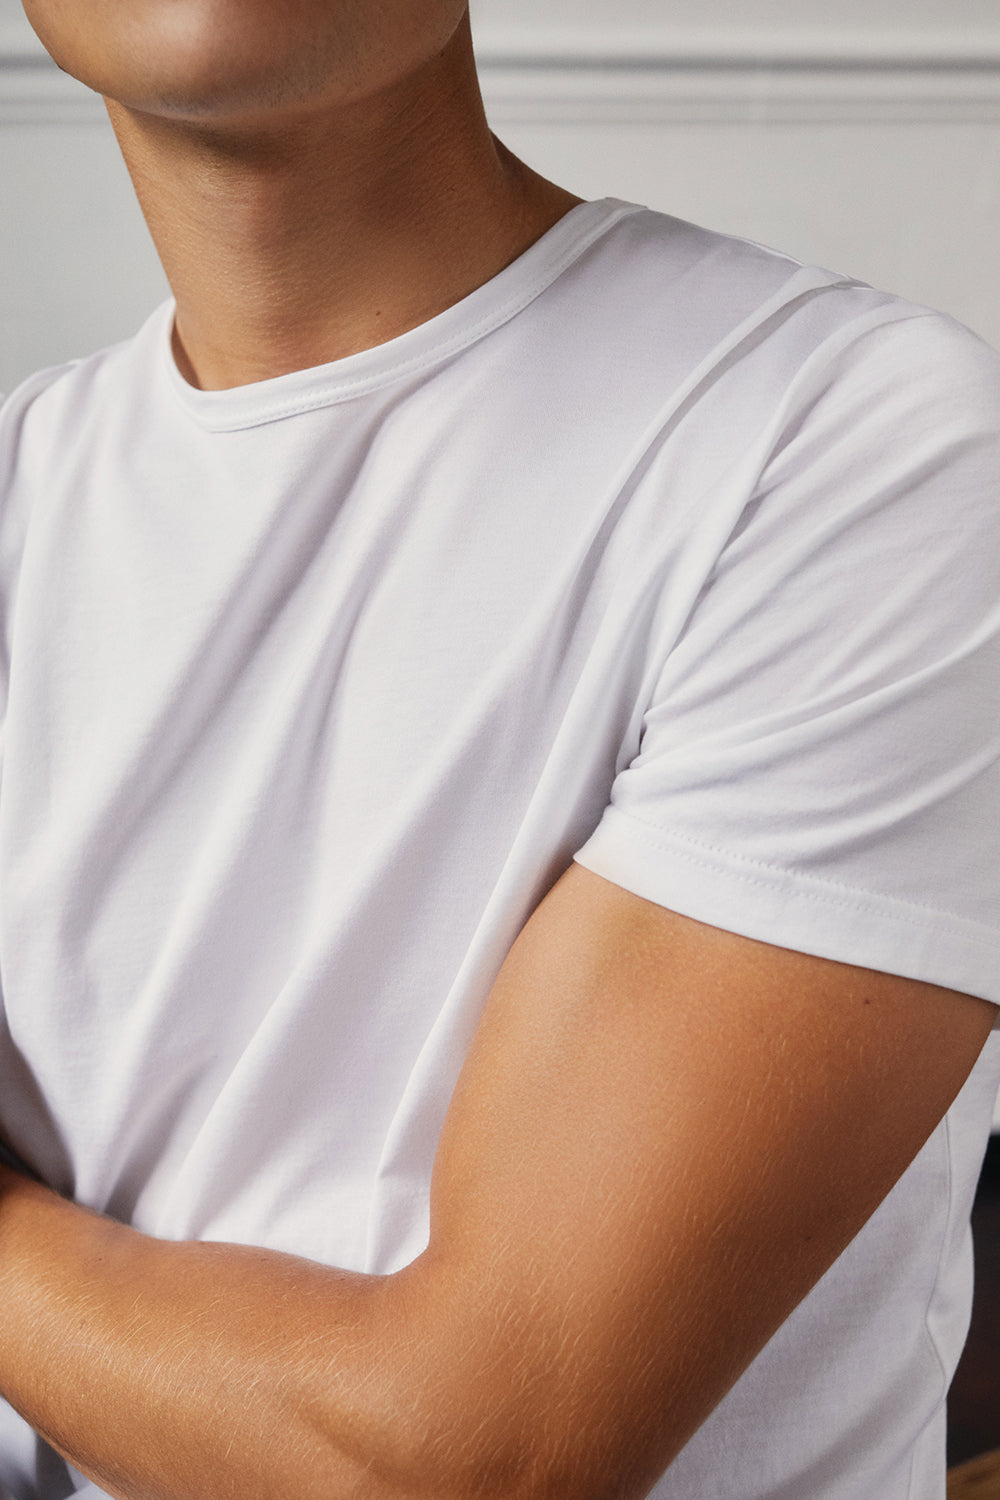 How to Care for Your T-shirt